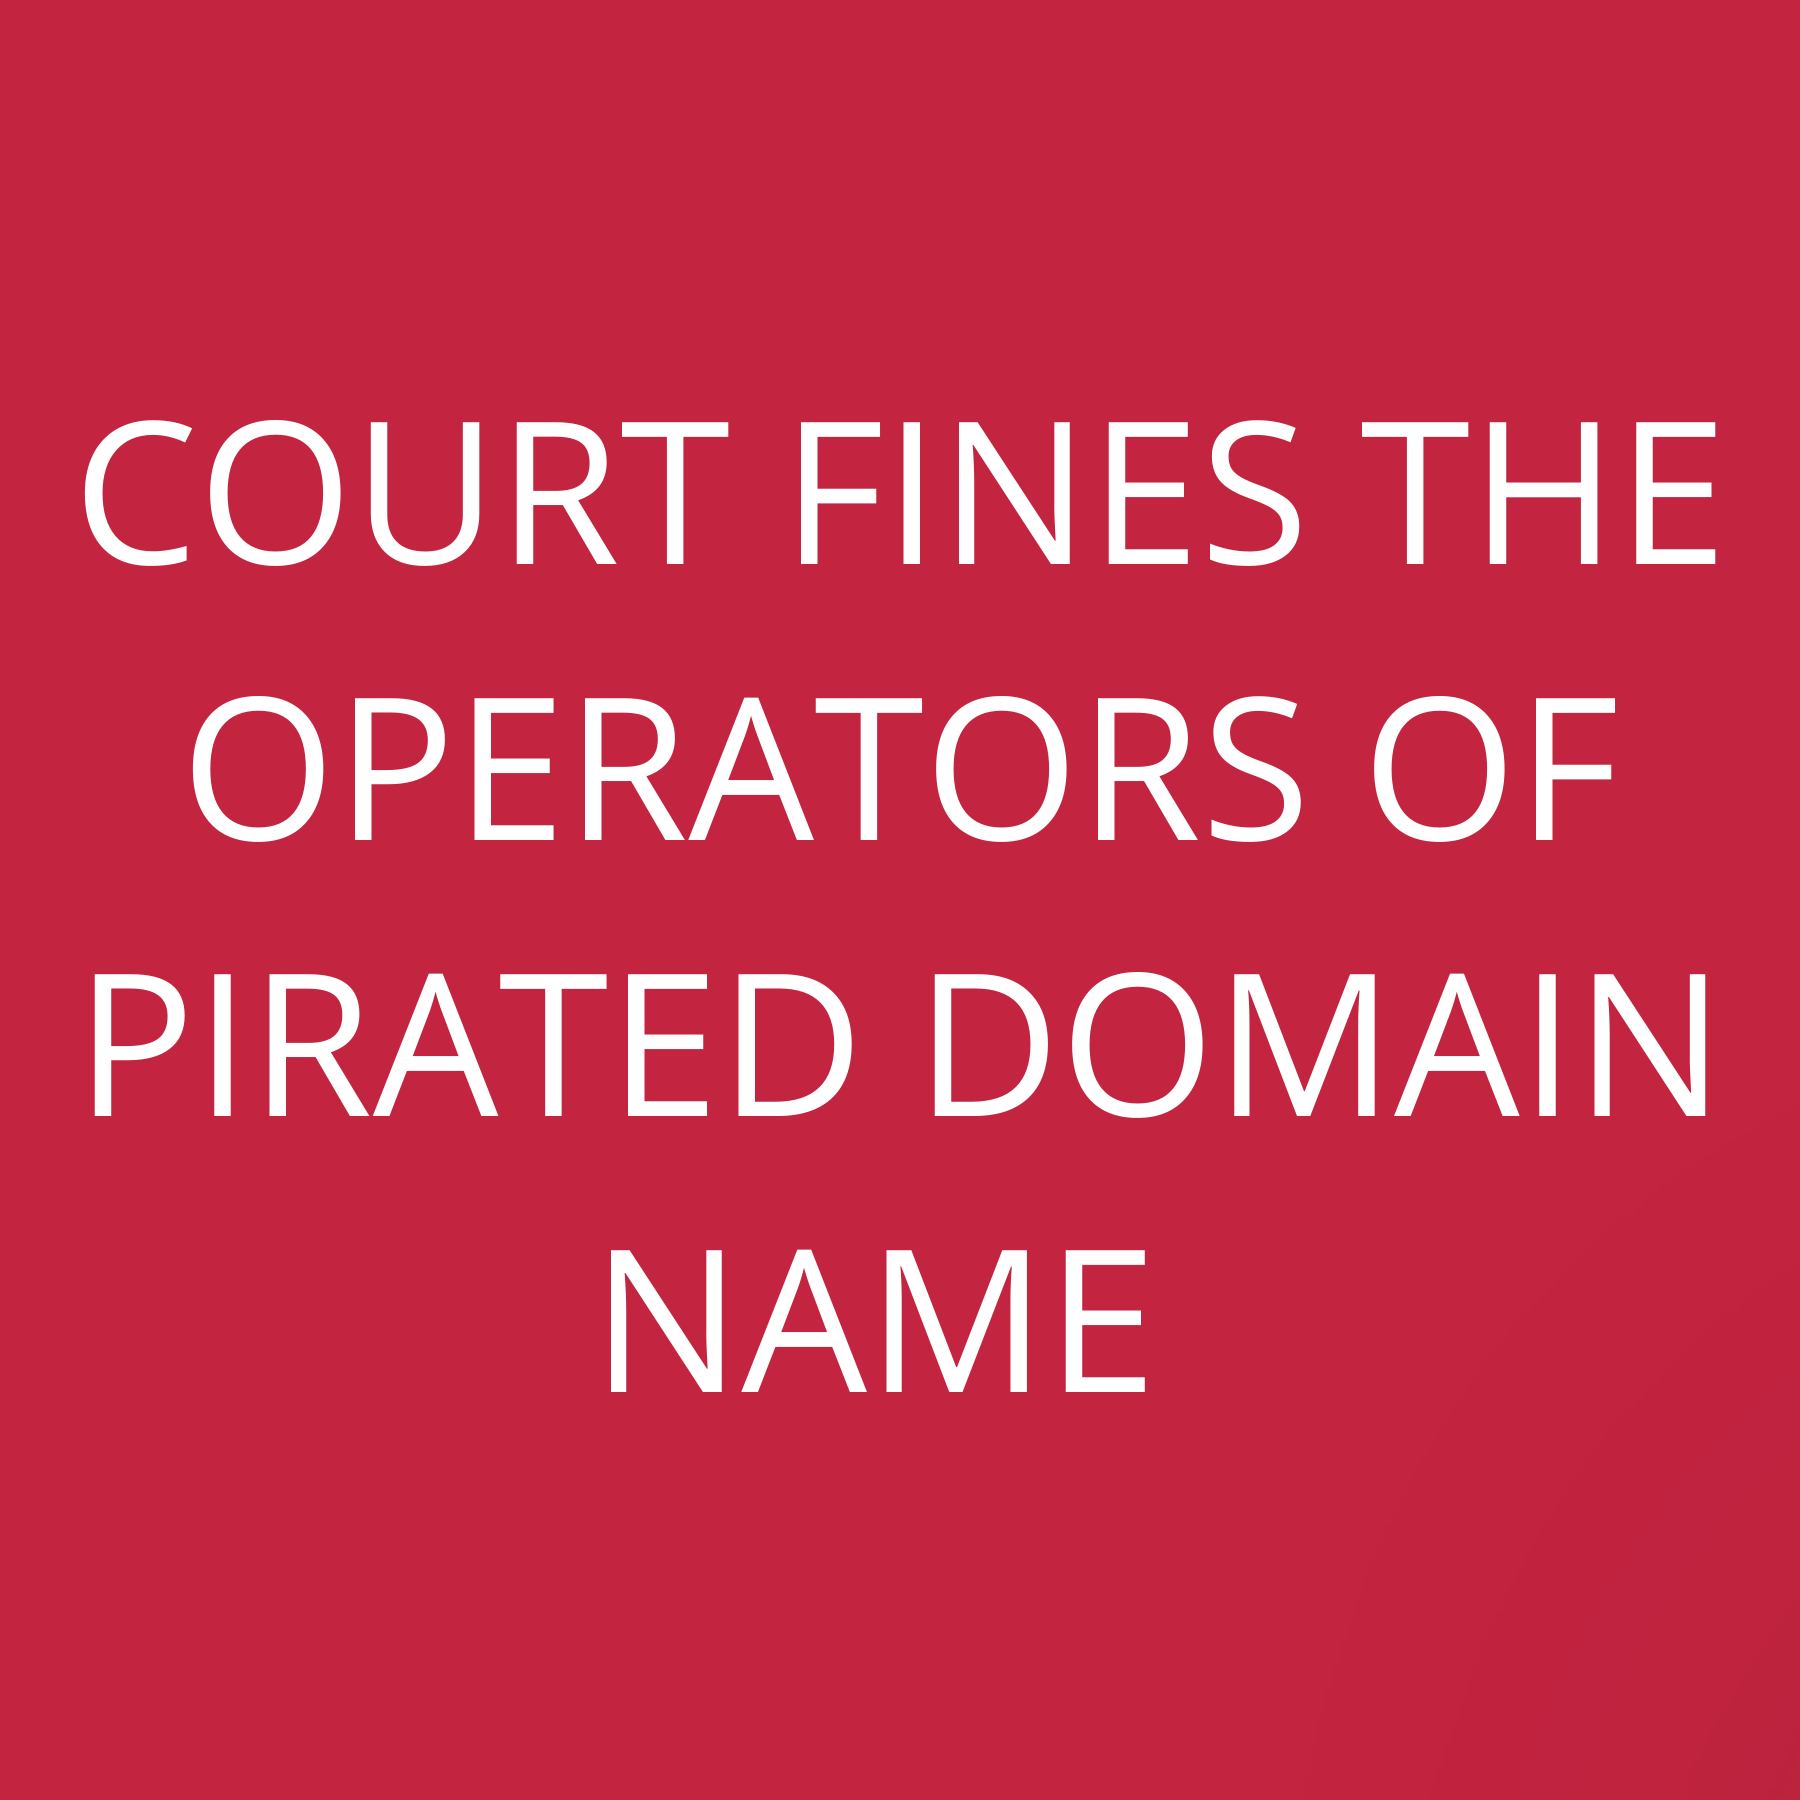 Court fines the operators of pirated domain name